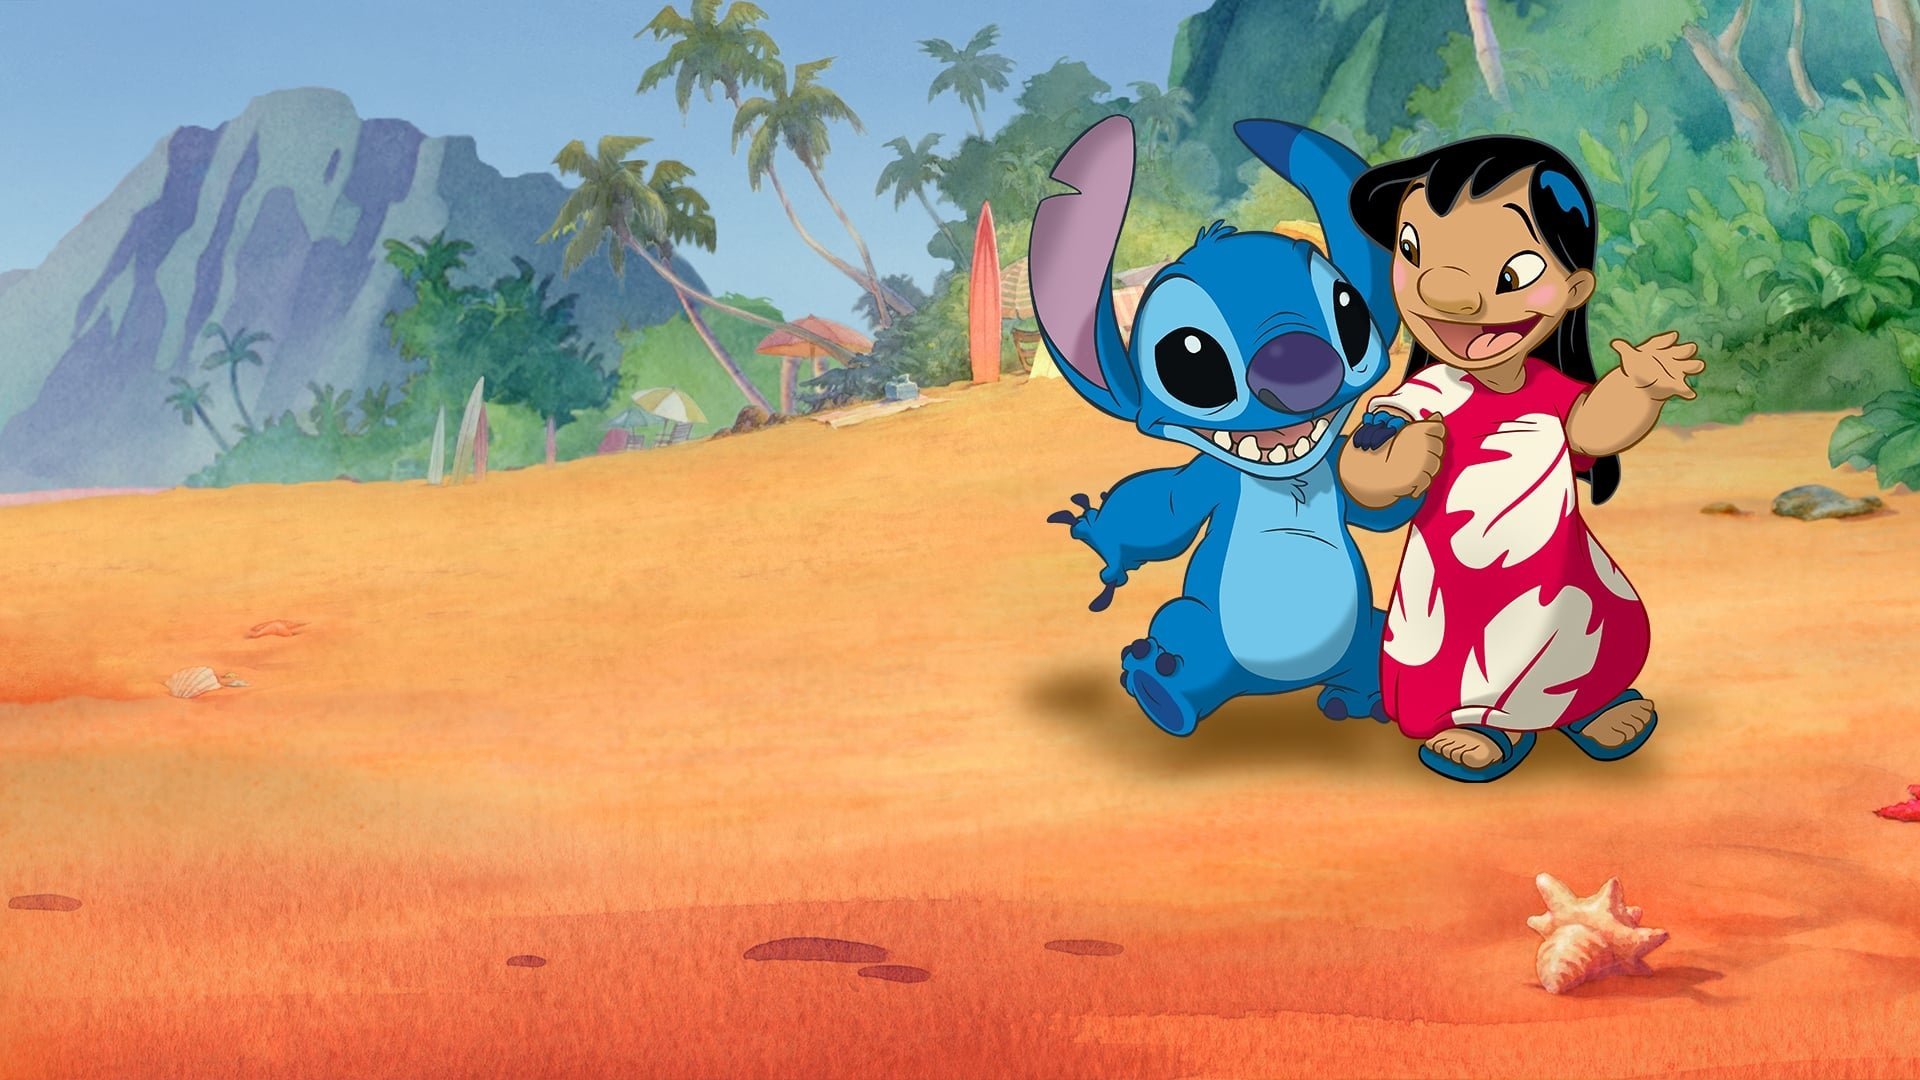 Lilo and stitch backgrounds